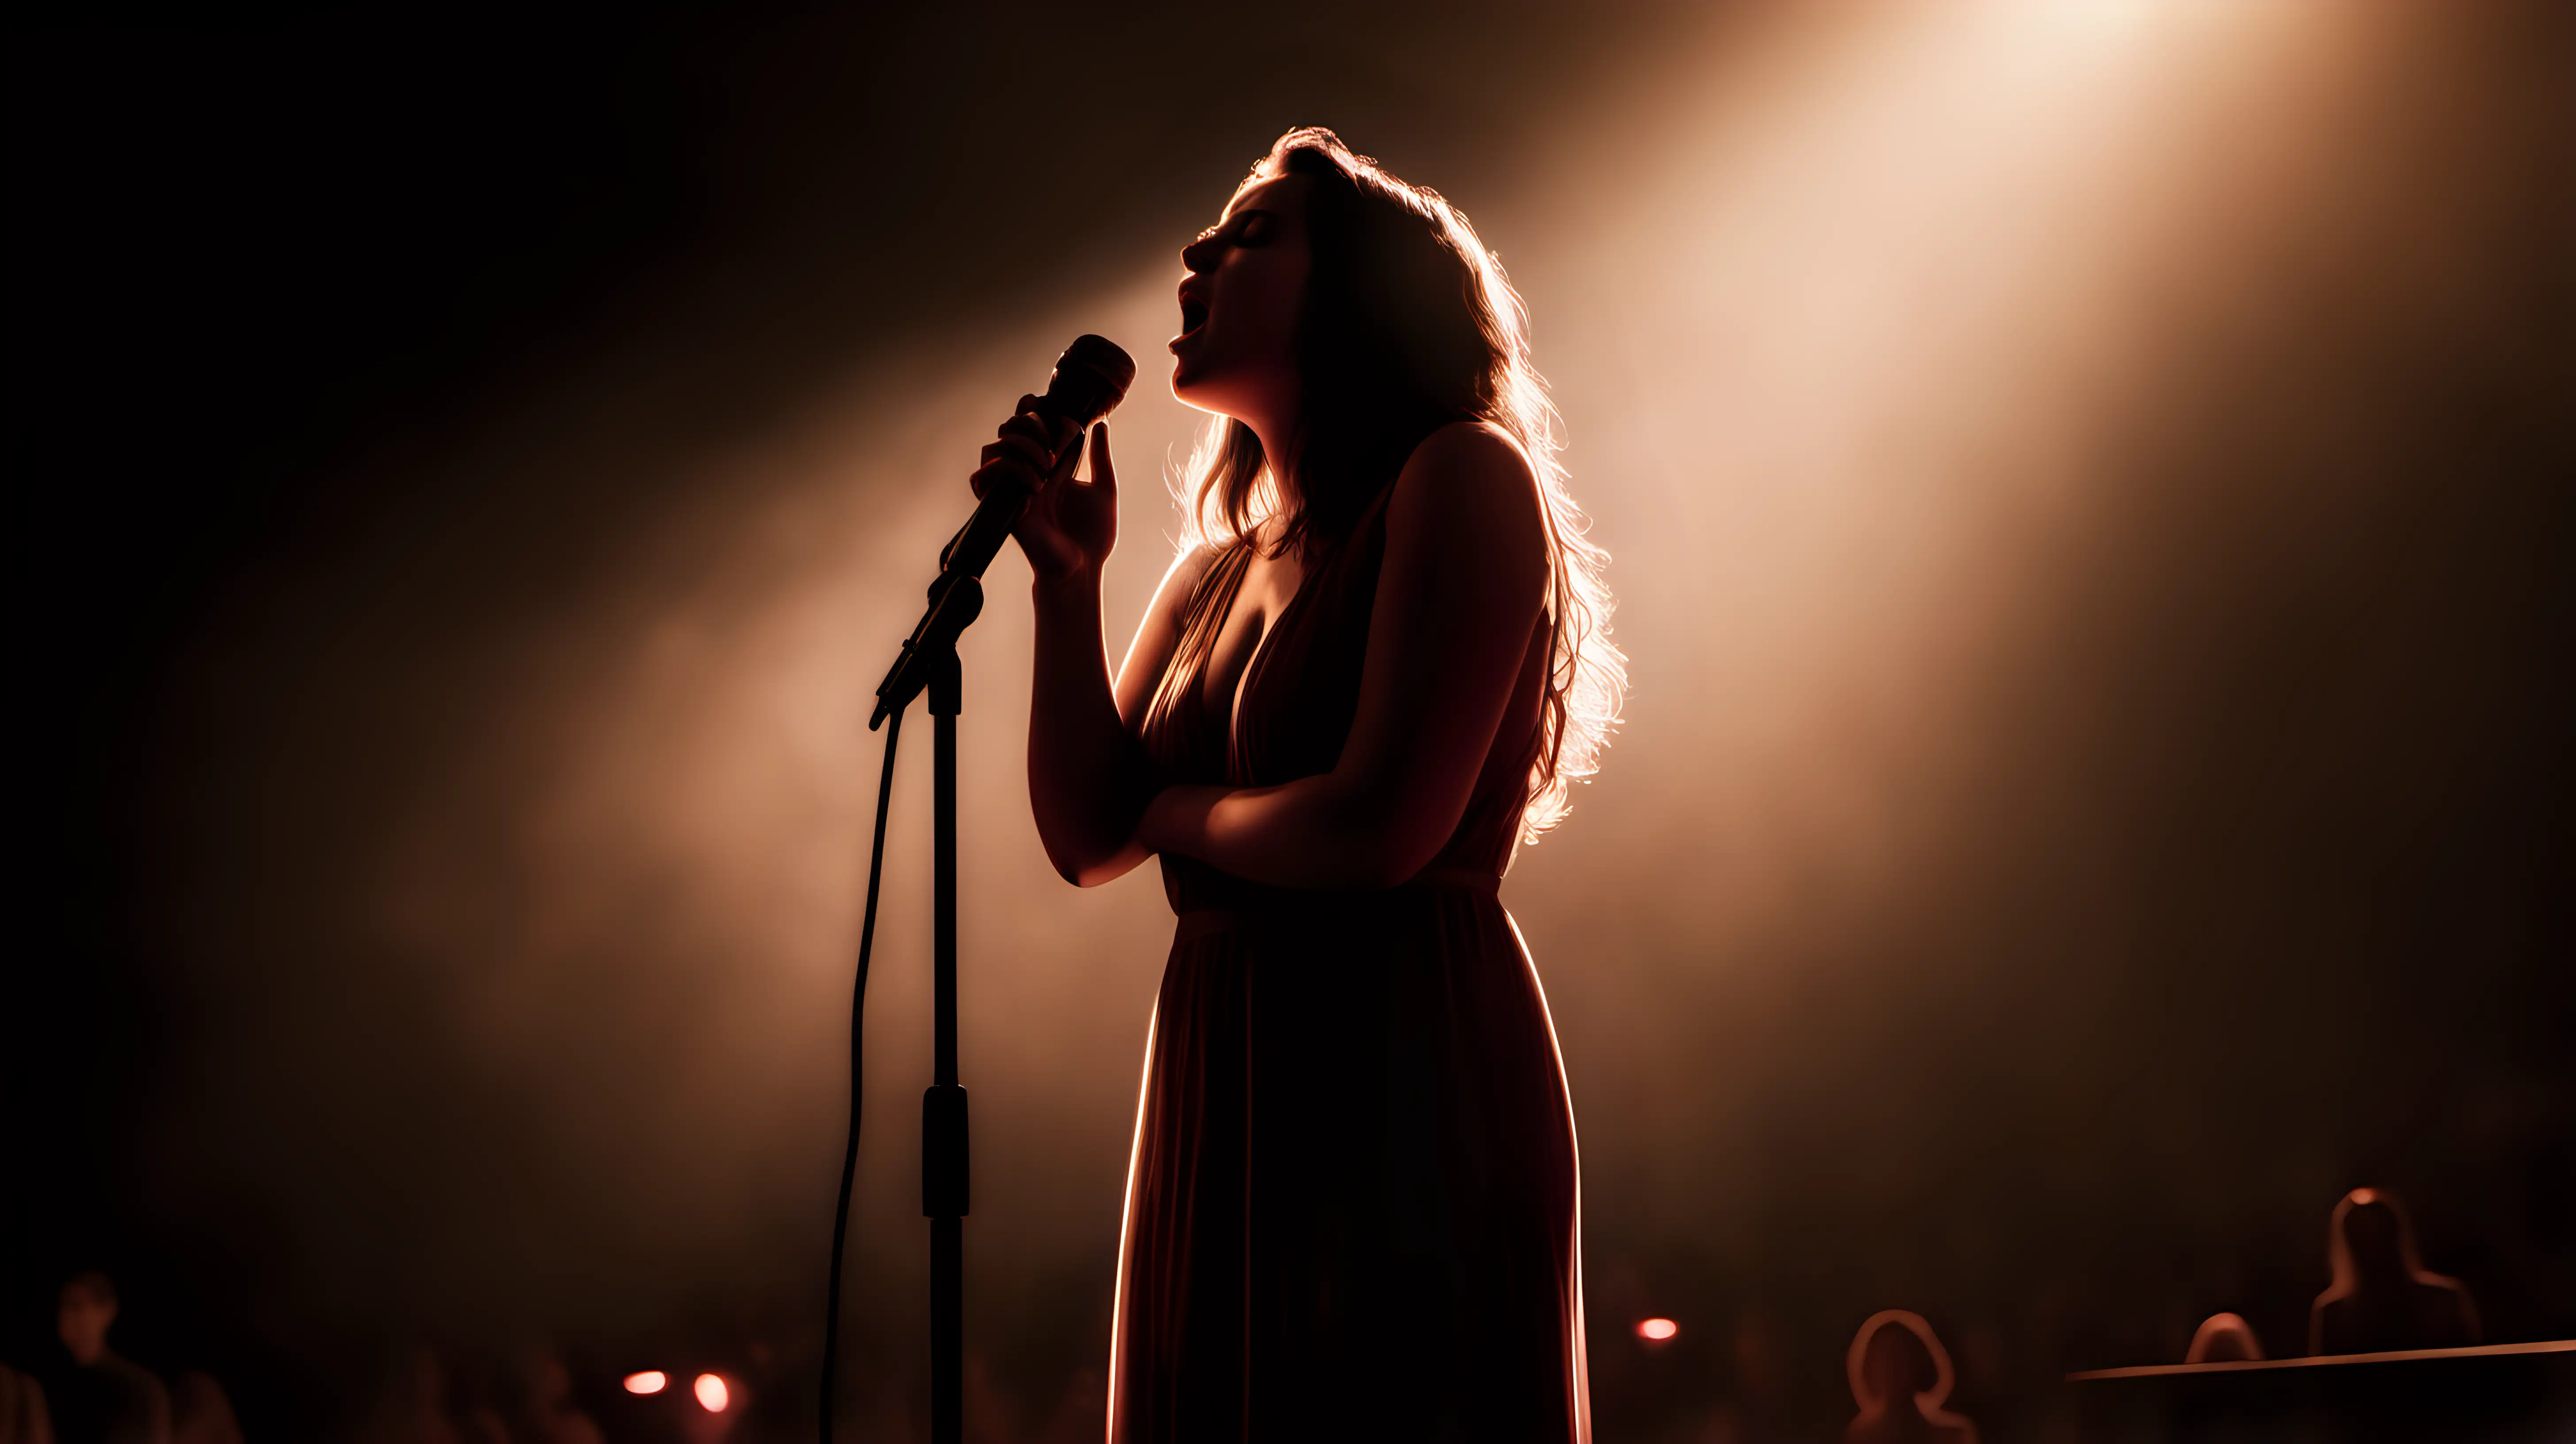 A vocalist stands on an empty stage, their face illuminated by the glow of the microphone, pouring their heart and soul into a song for an absent crowd.
